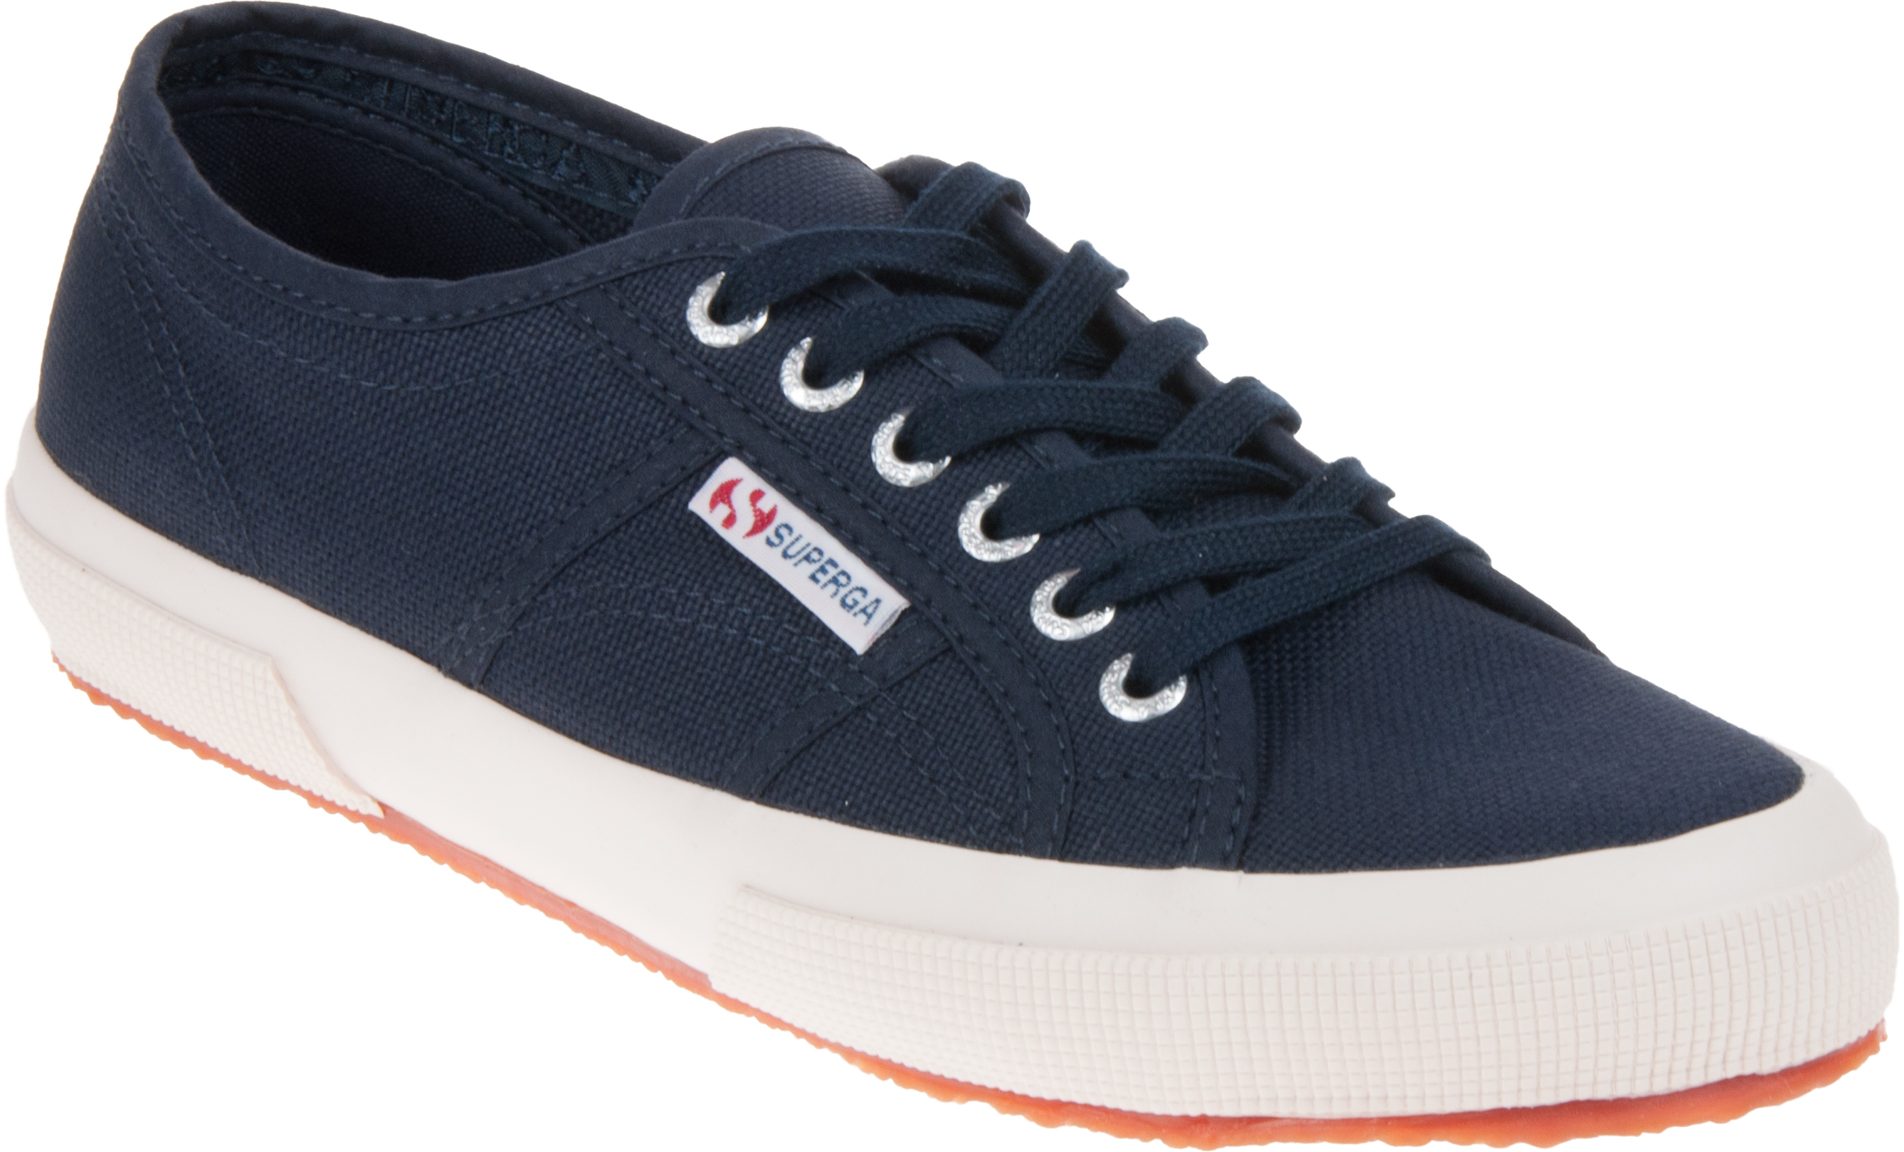 Superga Cotu Classic Navy 2750 933 - Everyday Shoes - Humphries Shoes